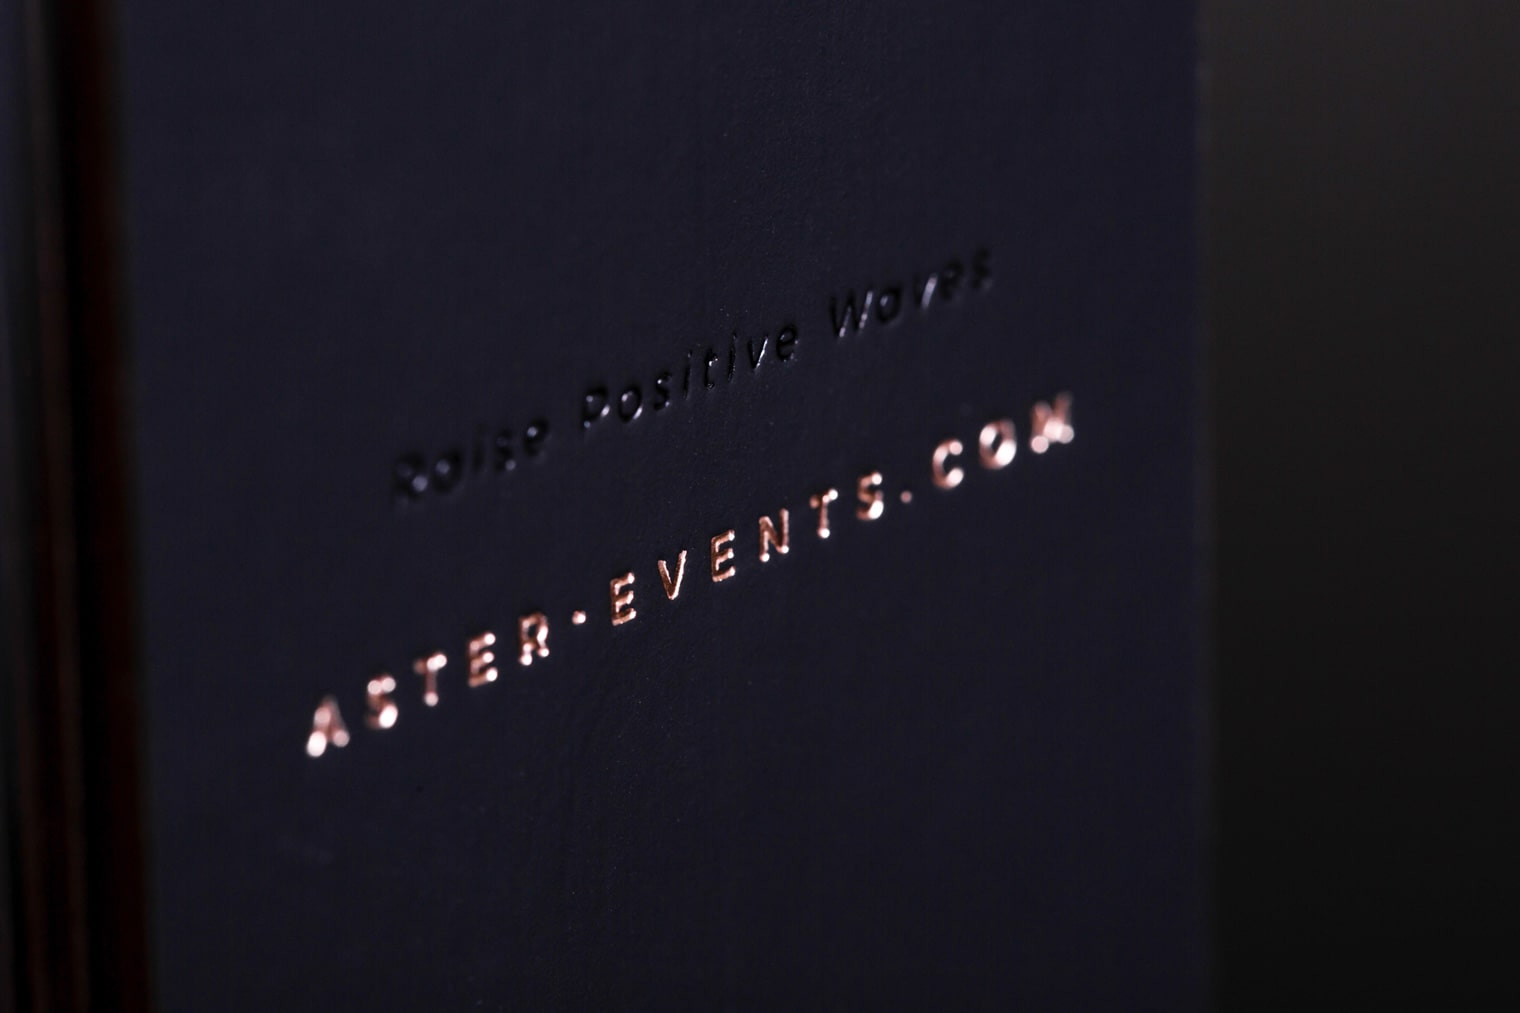 aster-events.com Aster events